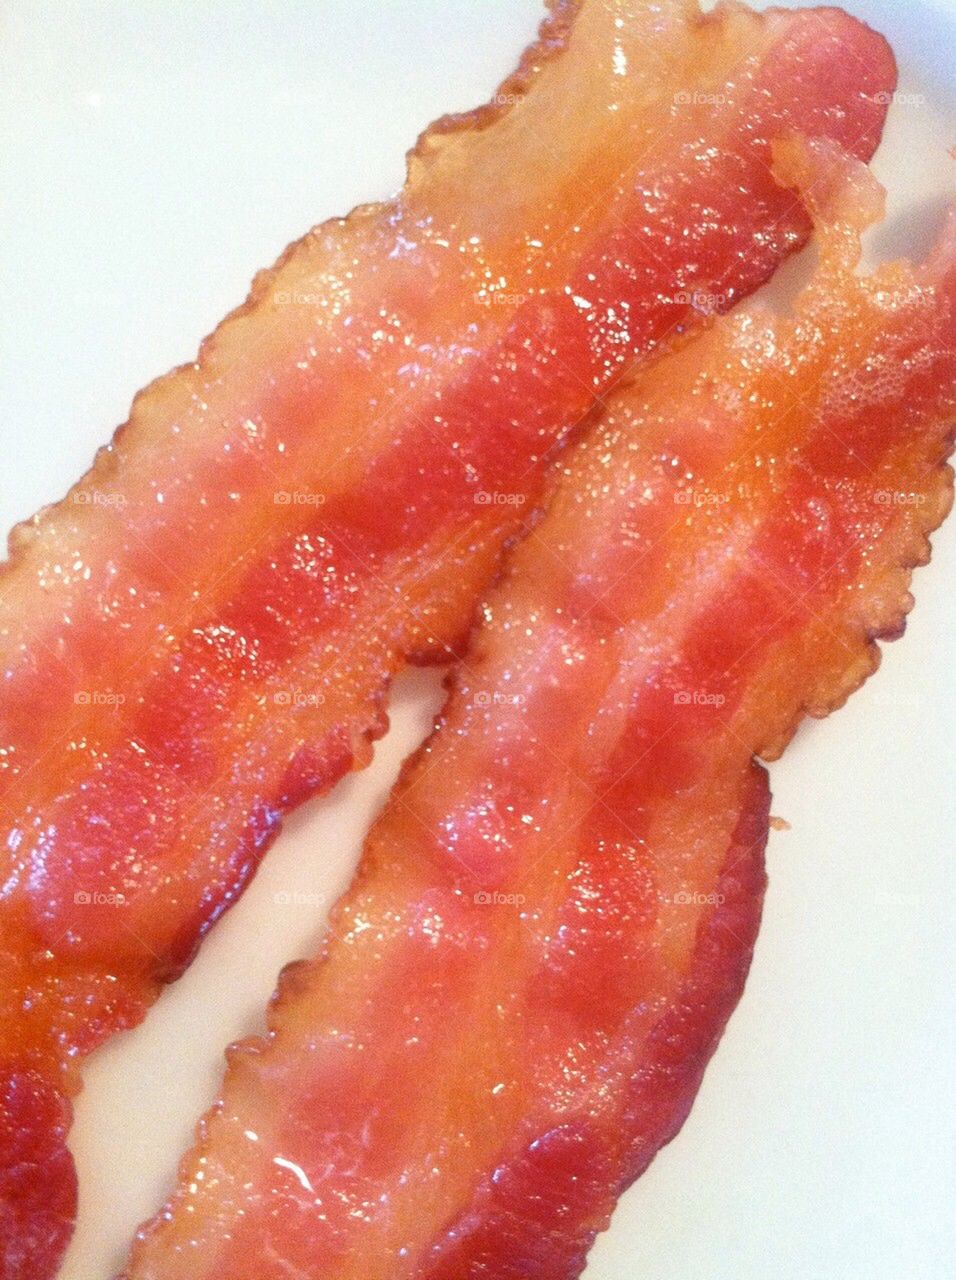 All you need is bacon